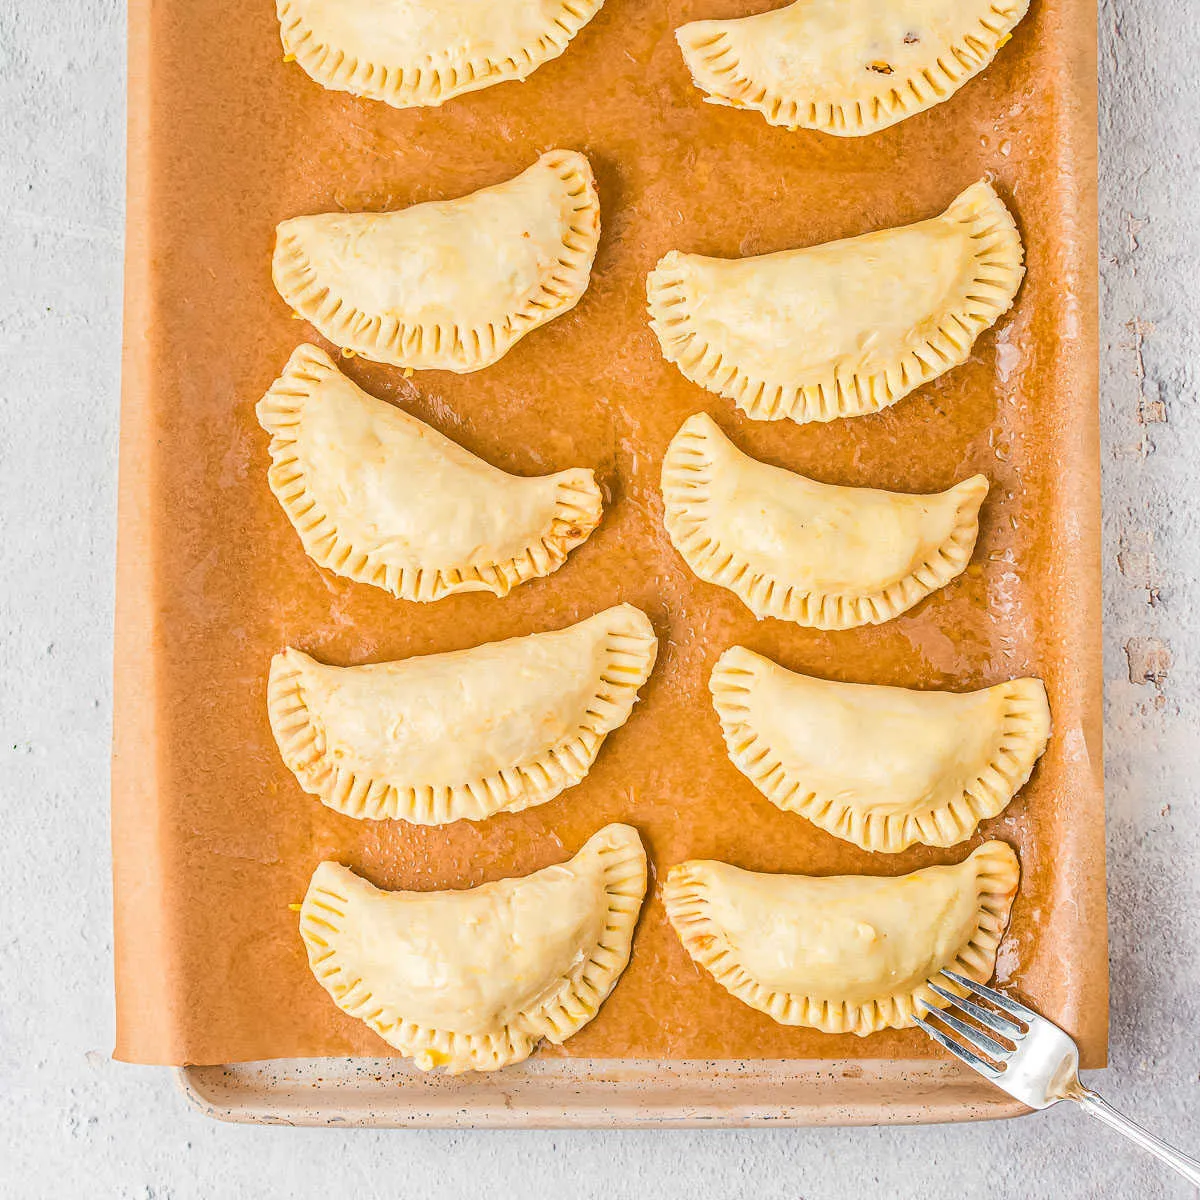 unbaked empanada dough on a baking sheet with a fork